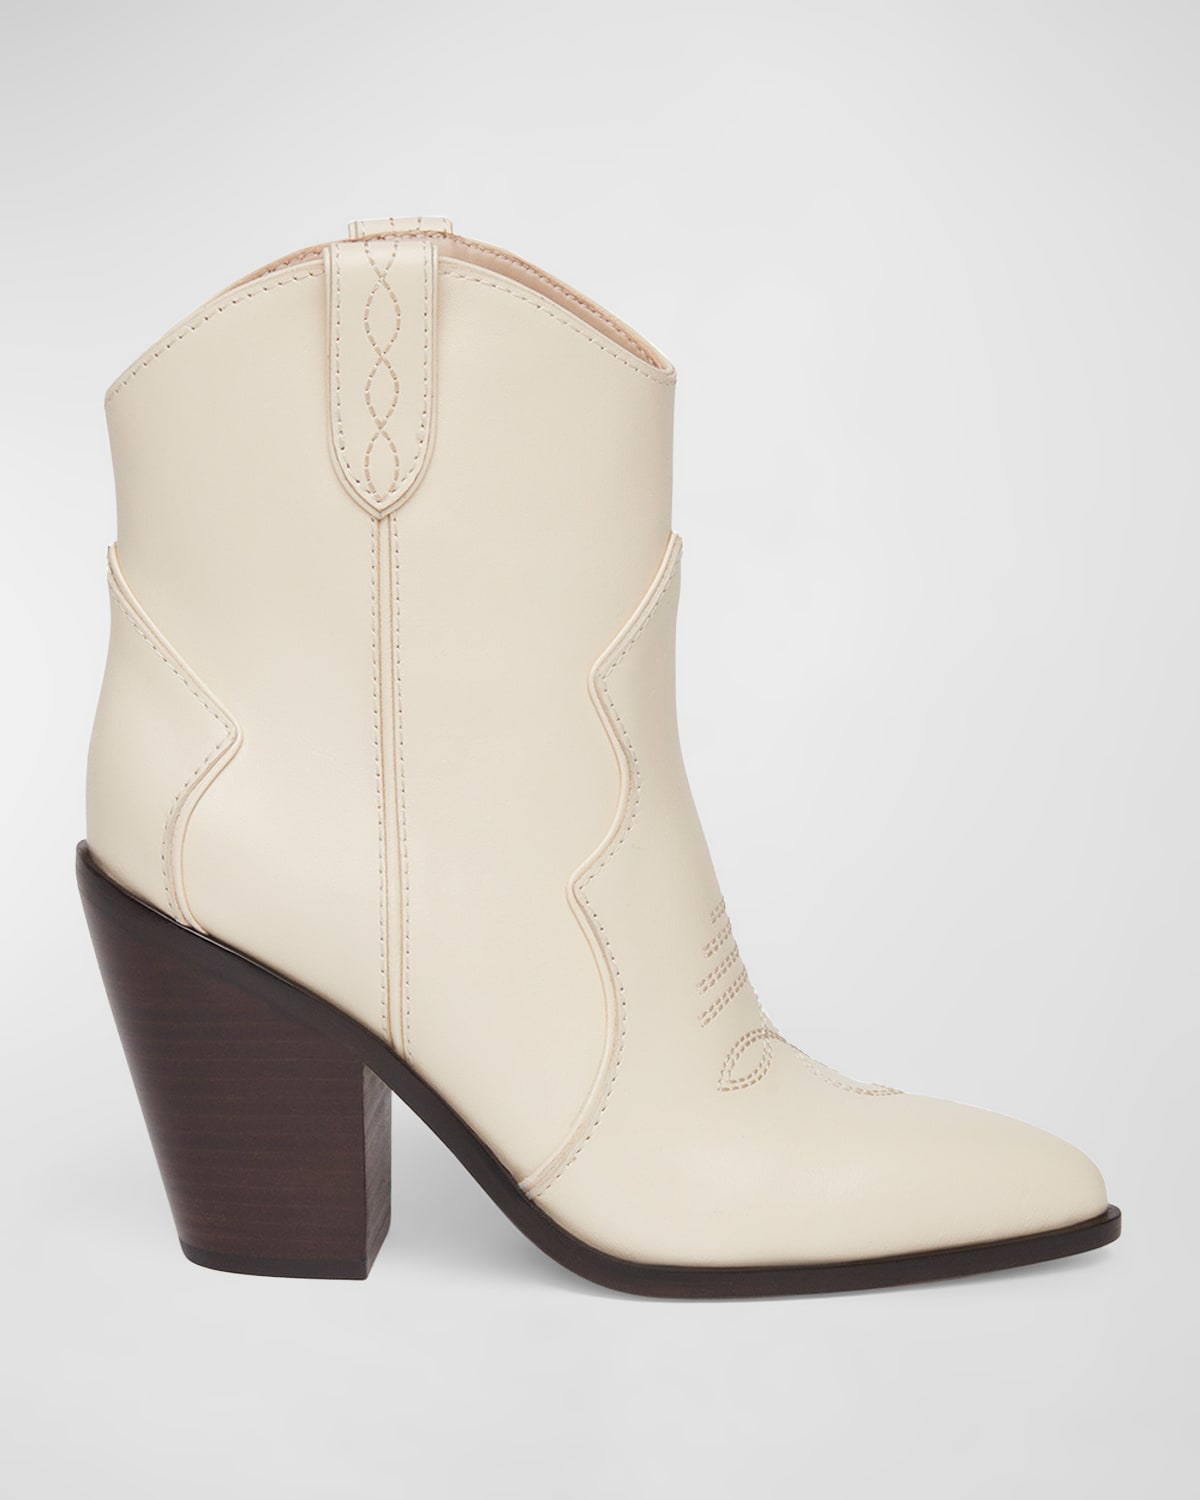 PAIGE PORTER LEATHER WESTERN ANKLE BOOTIES